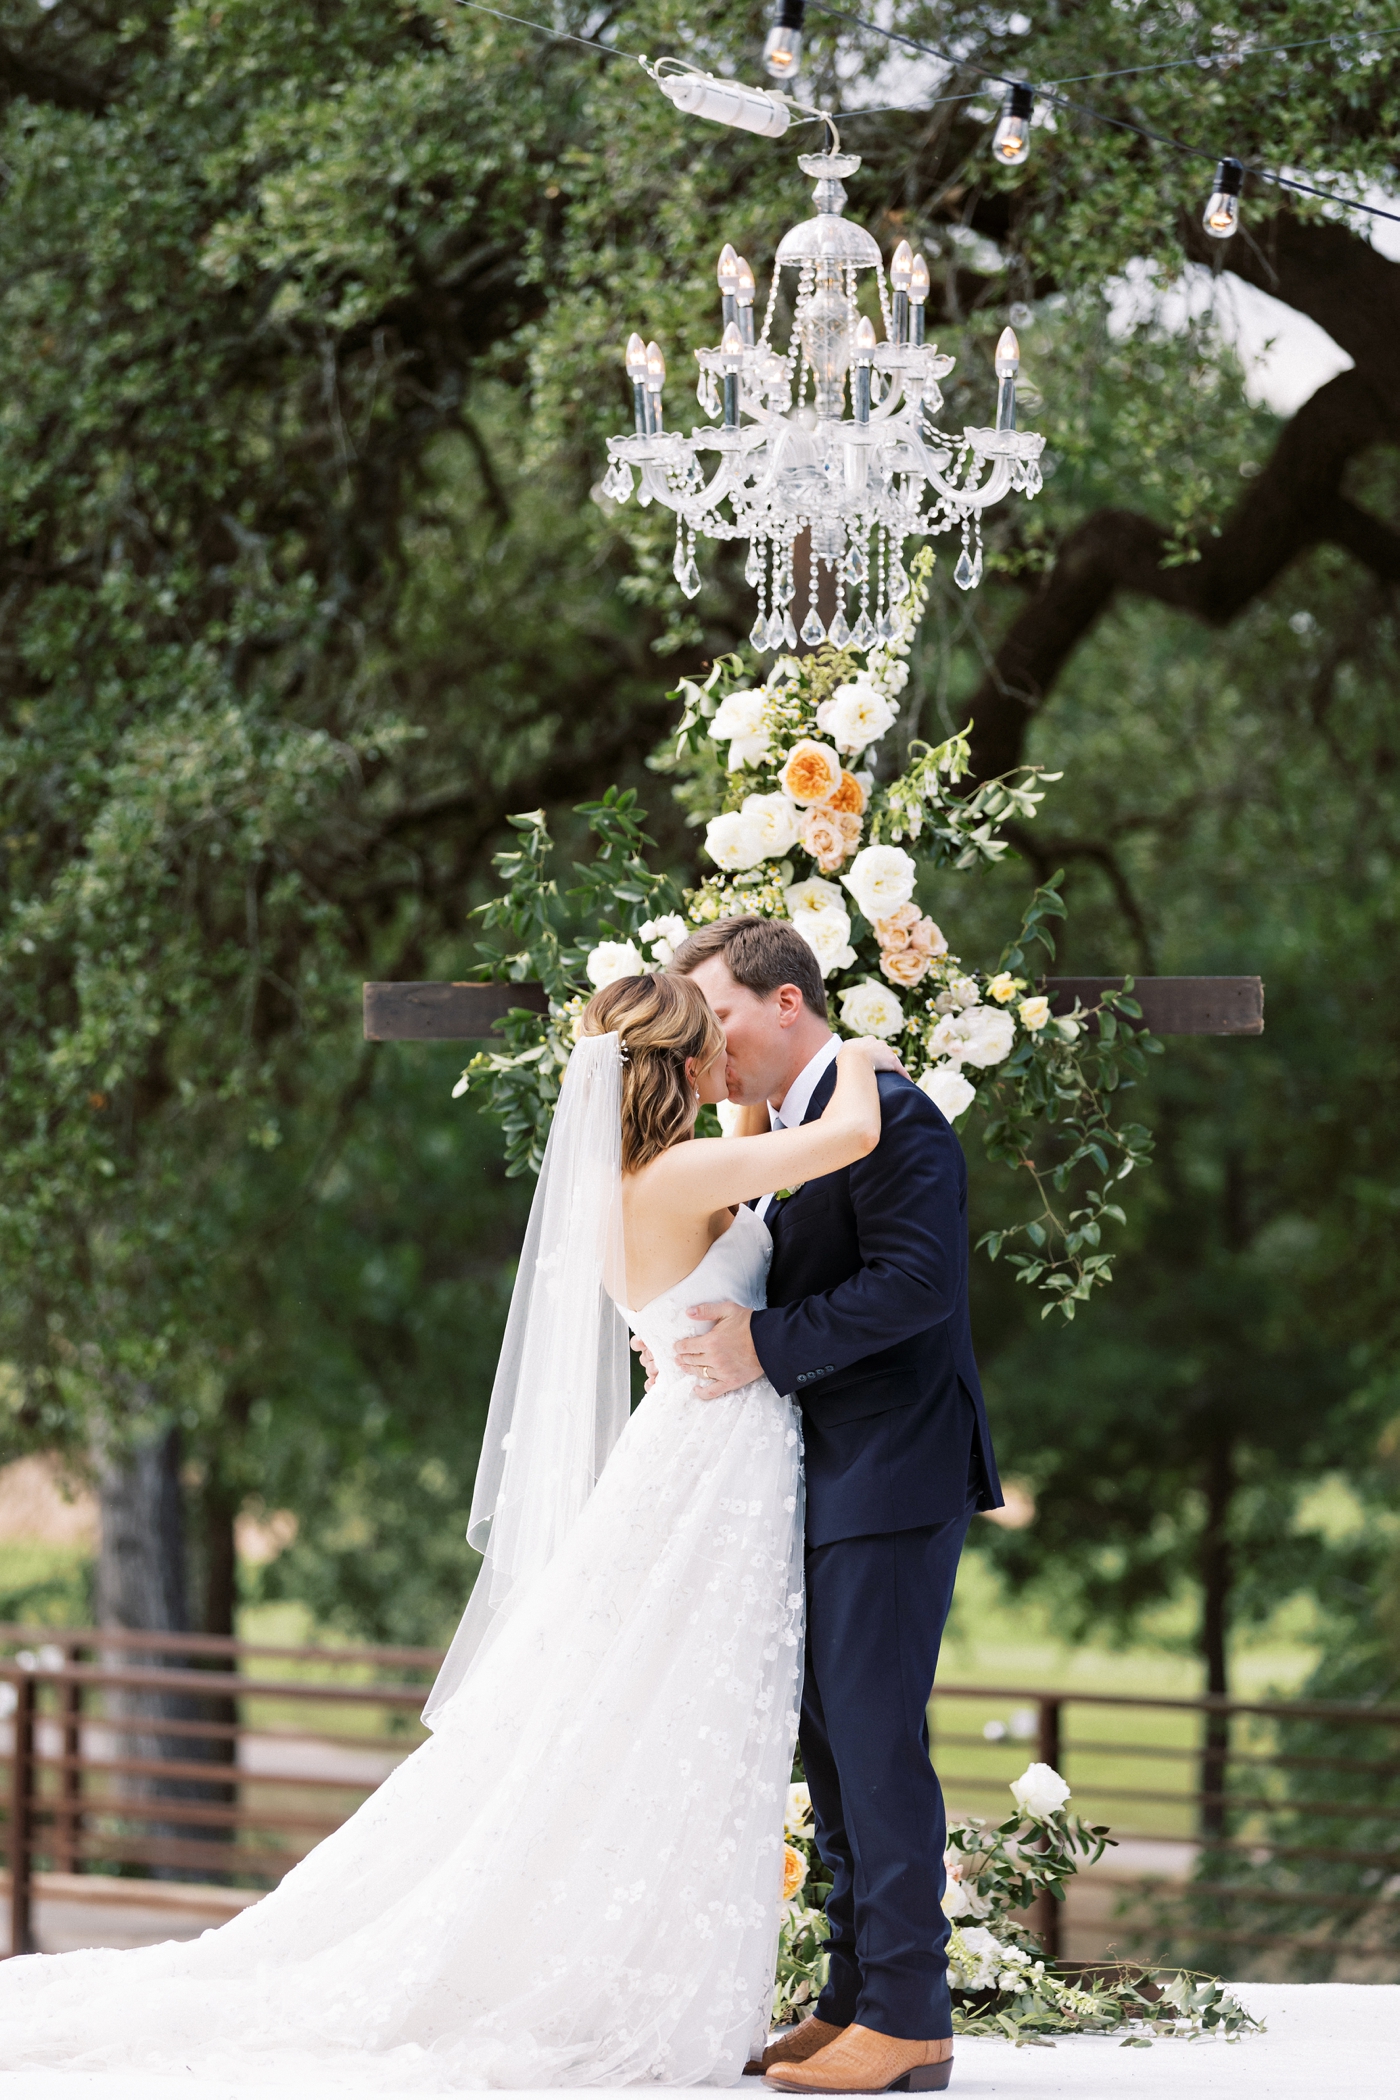 Bride and groom first kiss under a chandelier